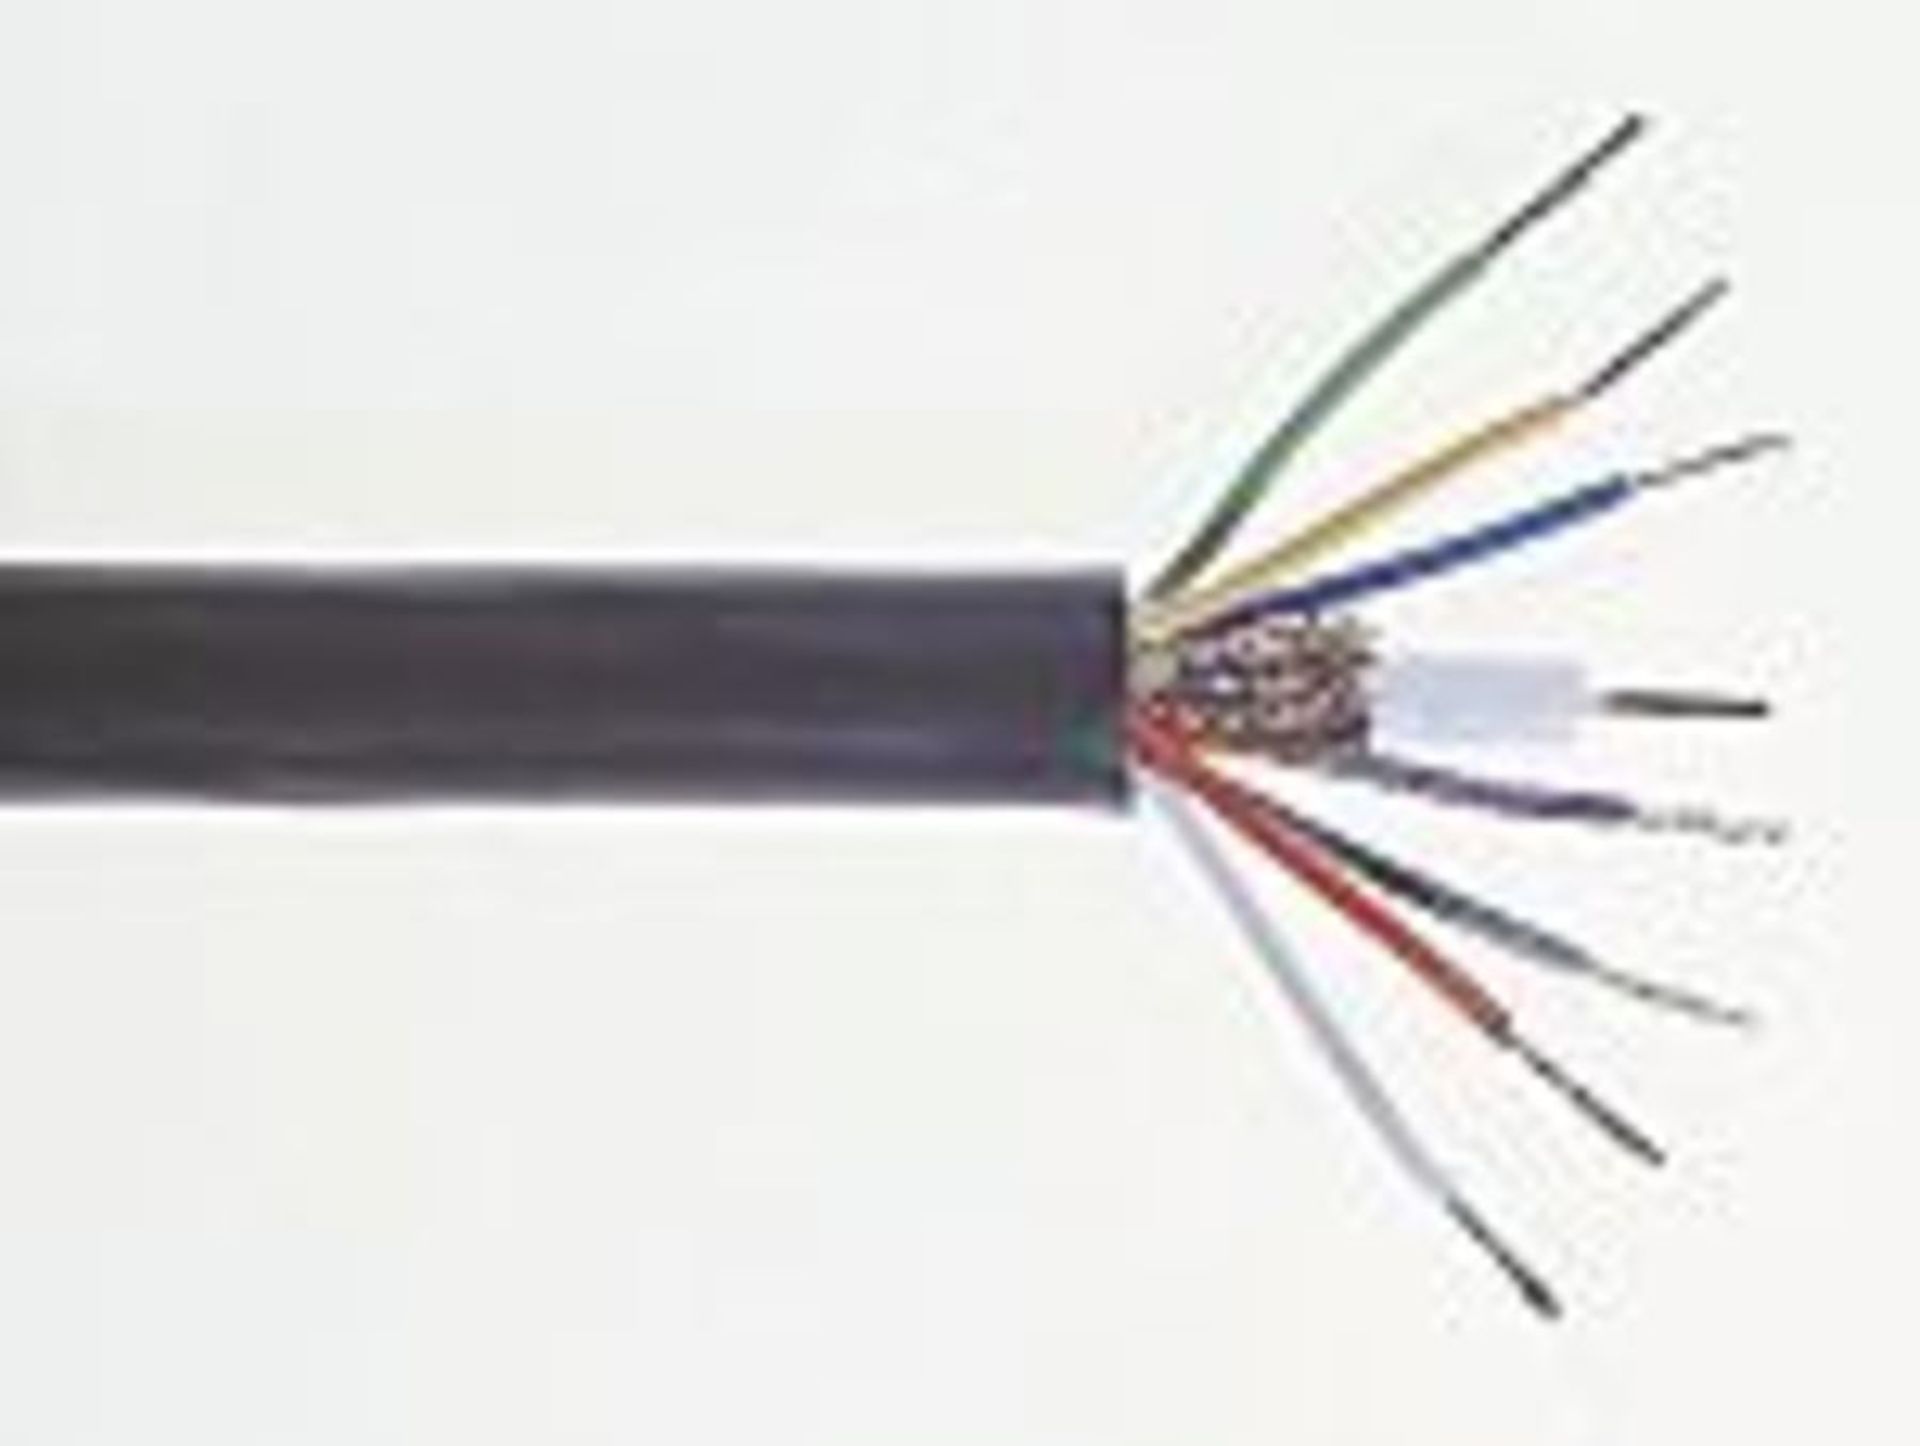 RS PRO Coaxial Cable, 75 Ω 100m - Image 2 of 2